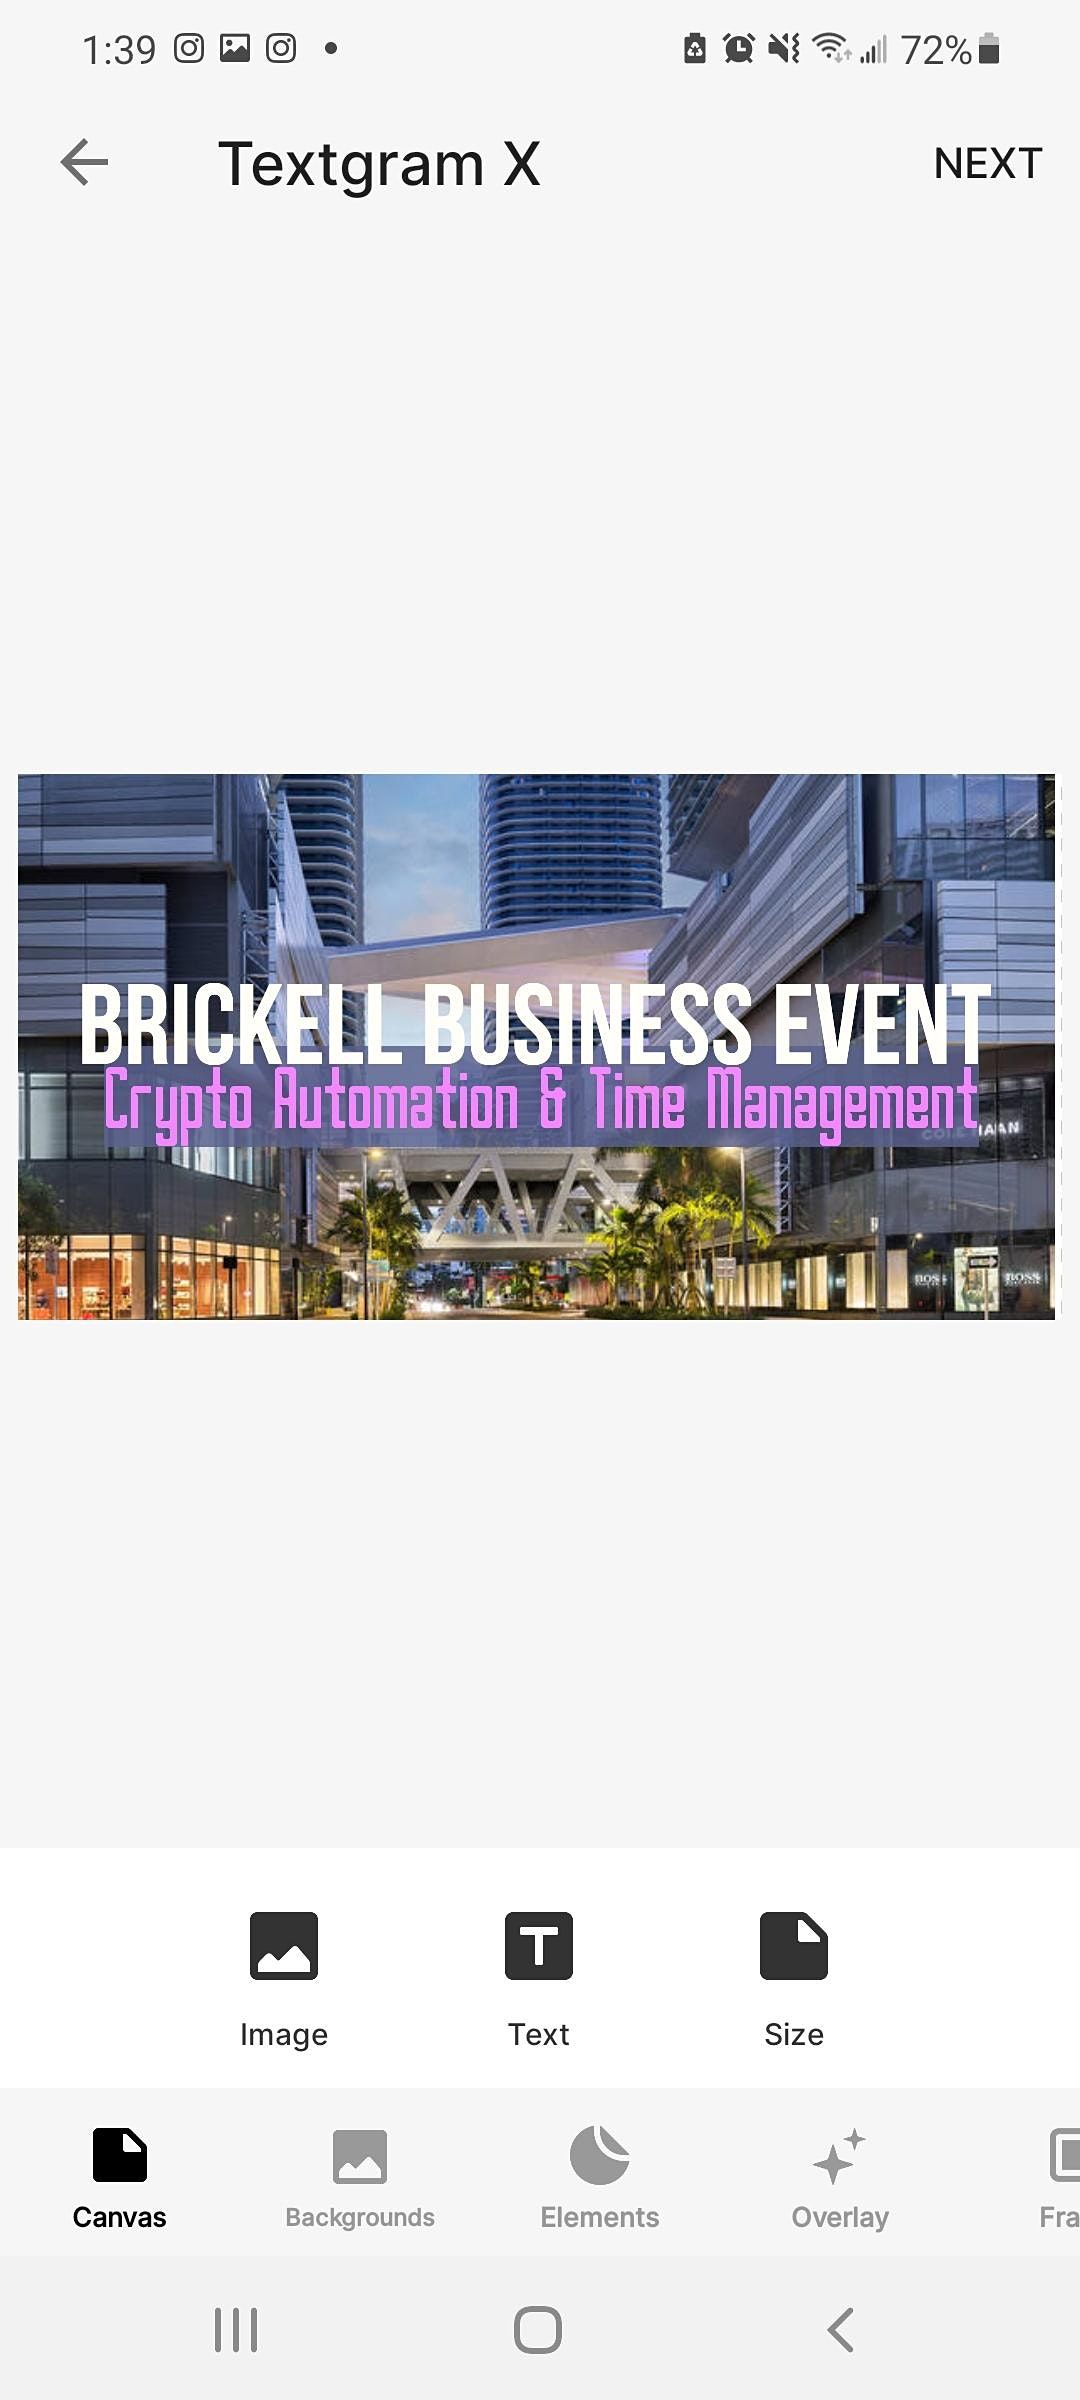 Brickell Business Event: Crypto A.I. & Time Management